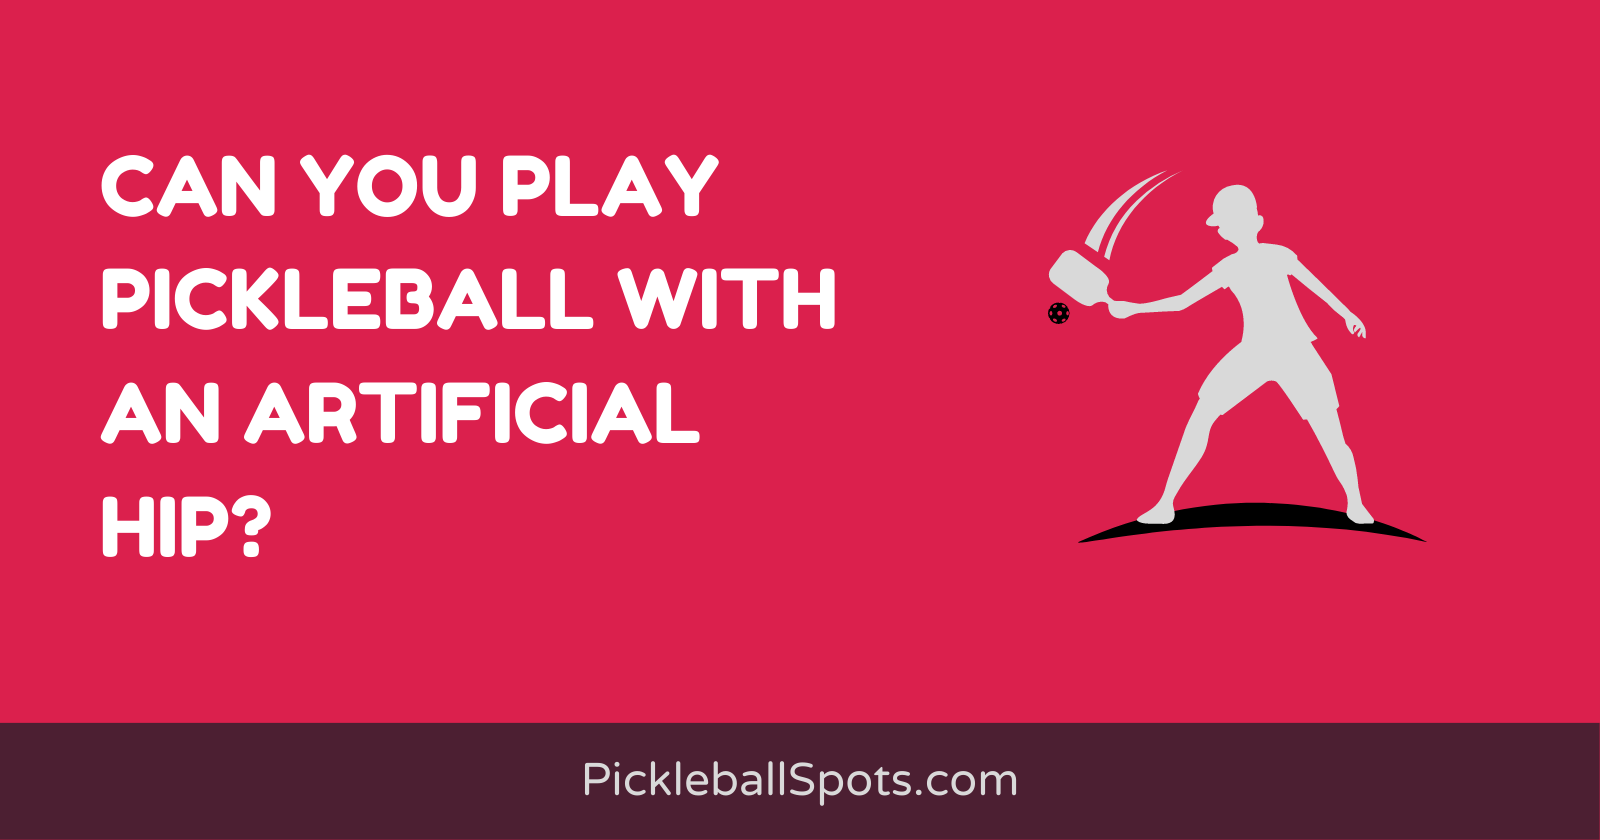 Can You Play Pickleball With An Artificial Hip